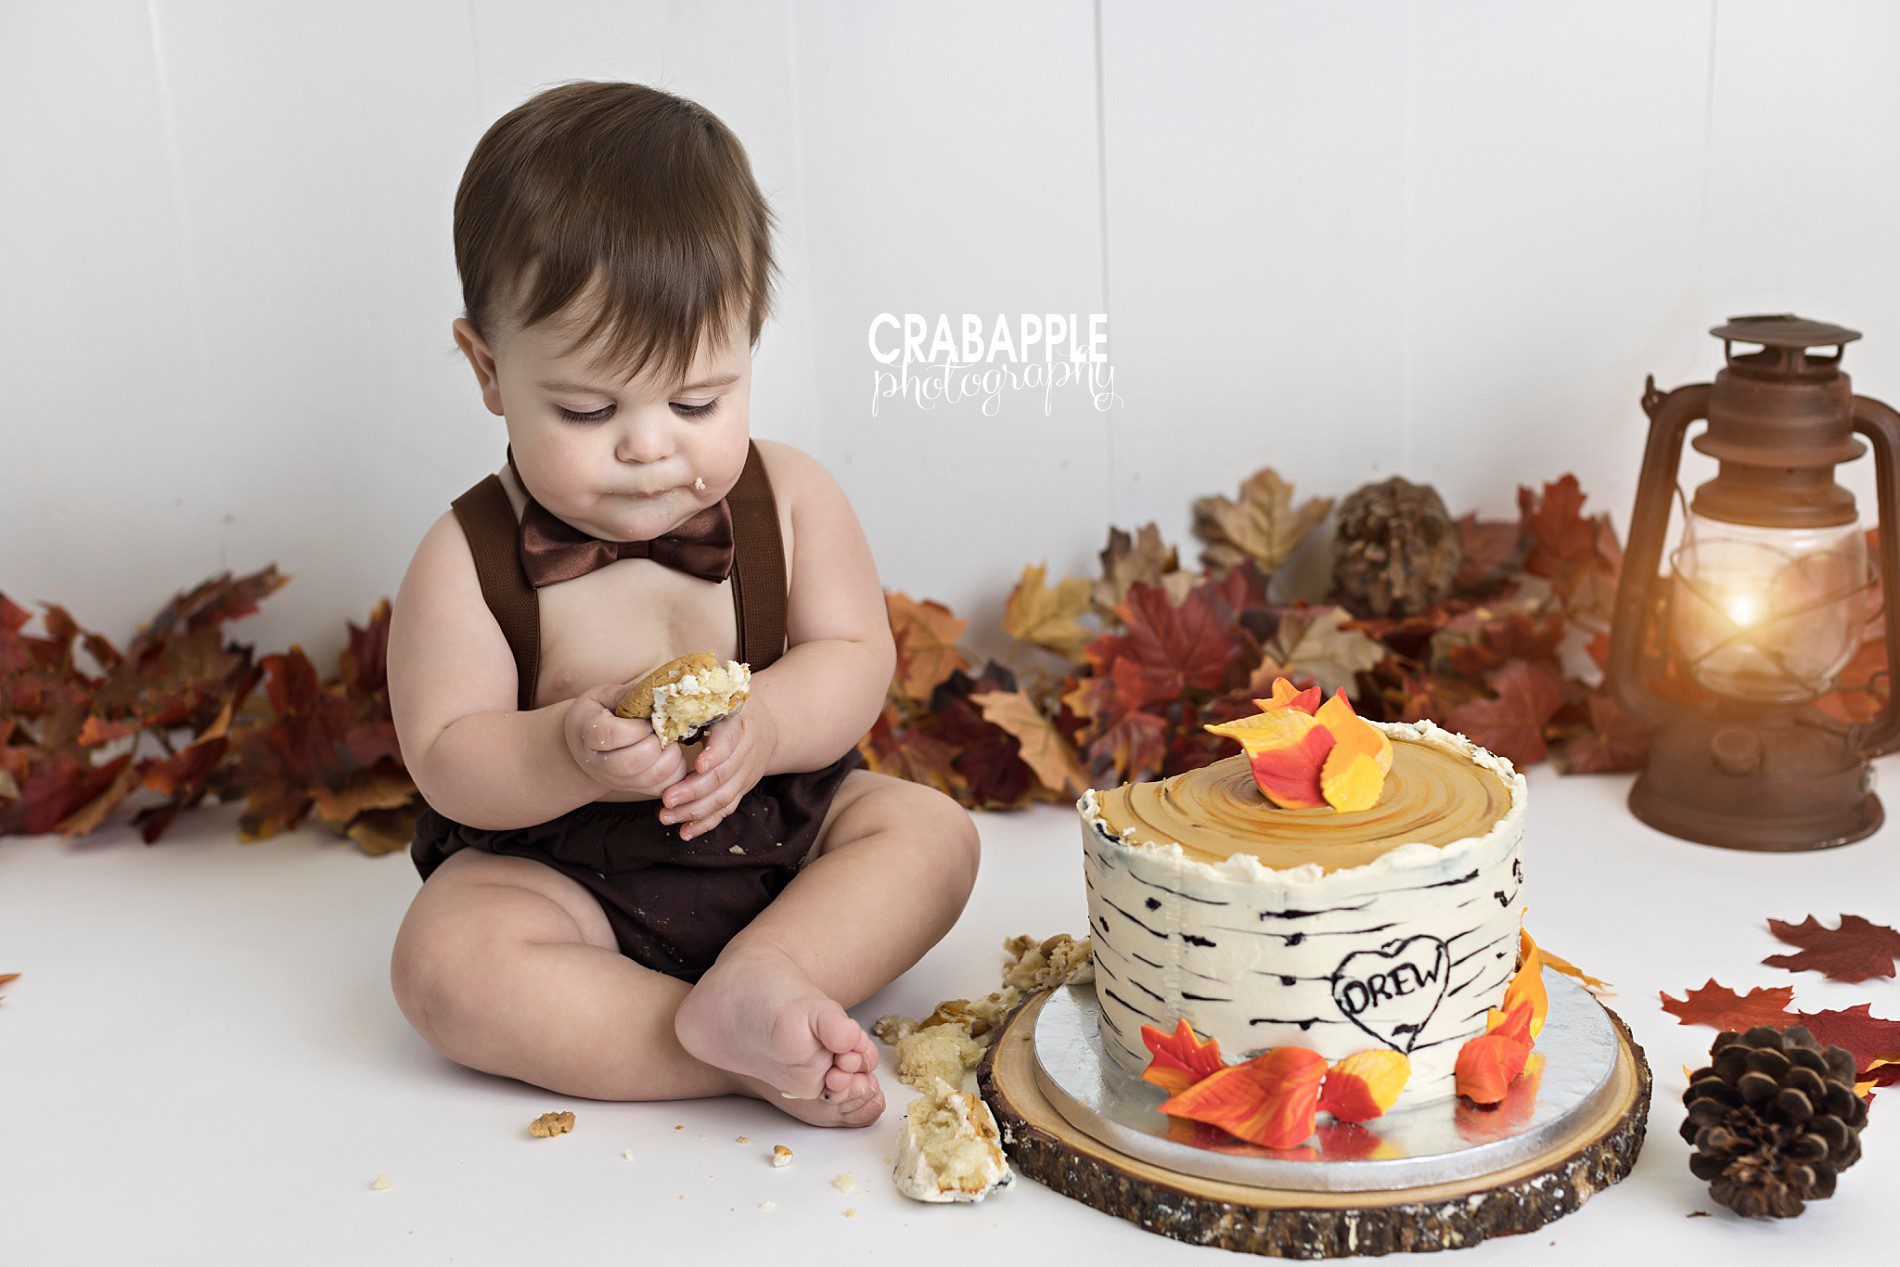 Autumn themed first birthday cake smash photography session using fall leaves, pinecones, and shades of brown and orange.